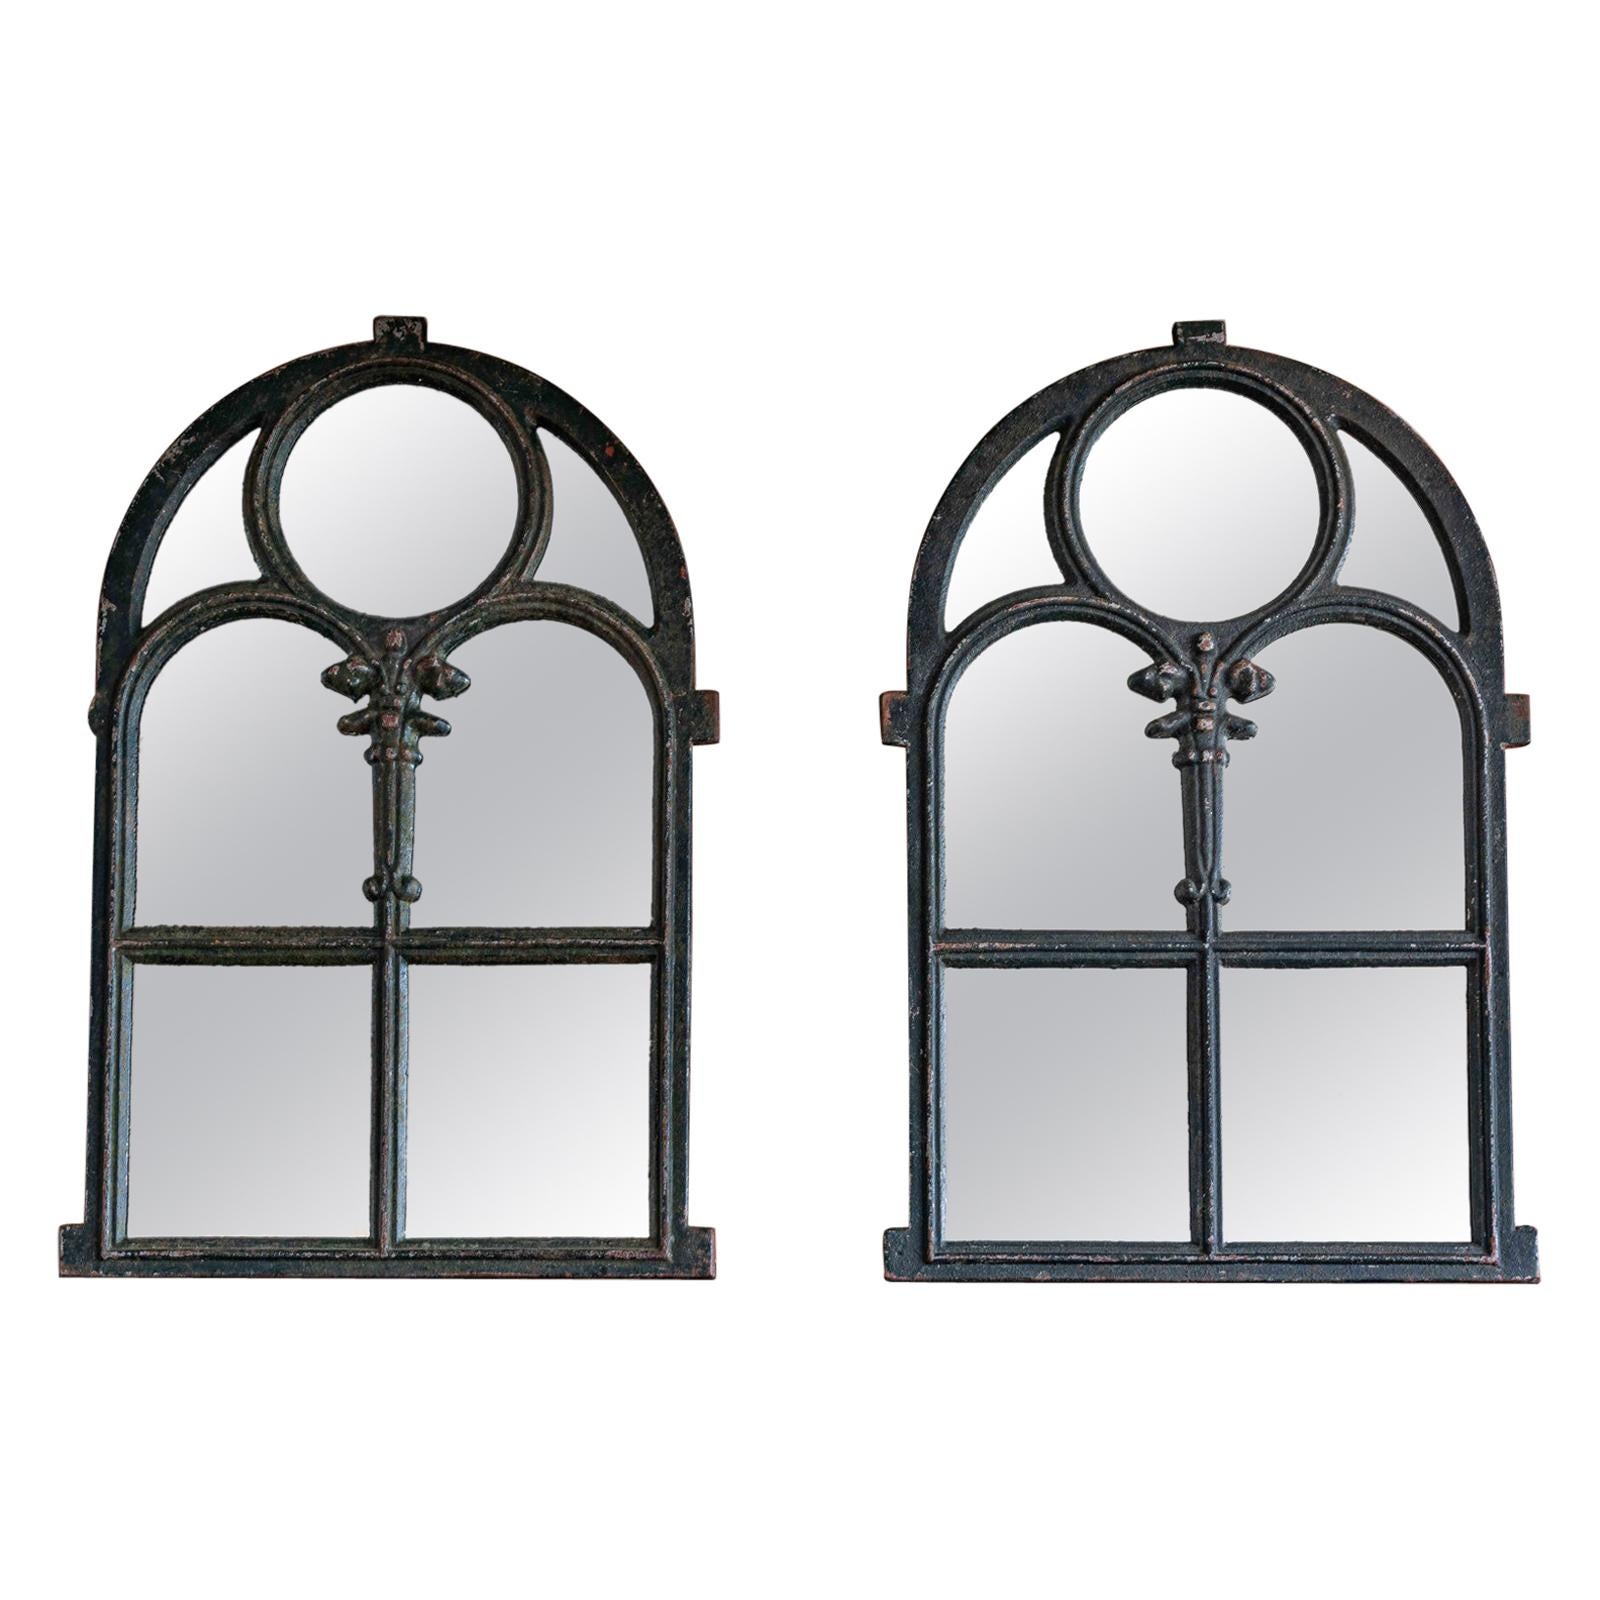 Pair of Dark Green Arched Cast Iron Reclaimed Window Mirrors, Late 19th Century